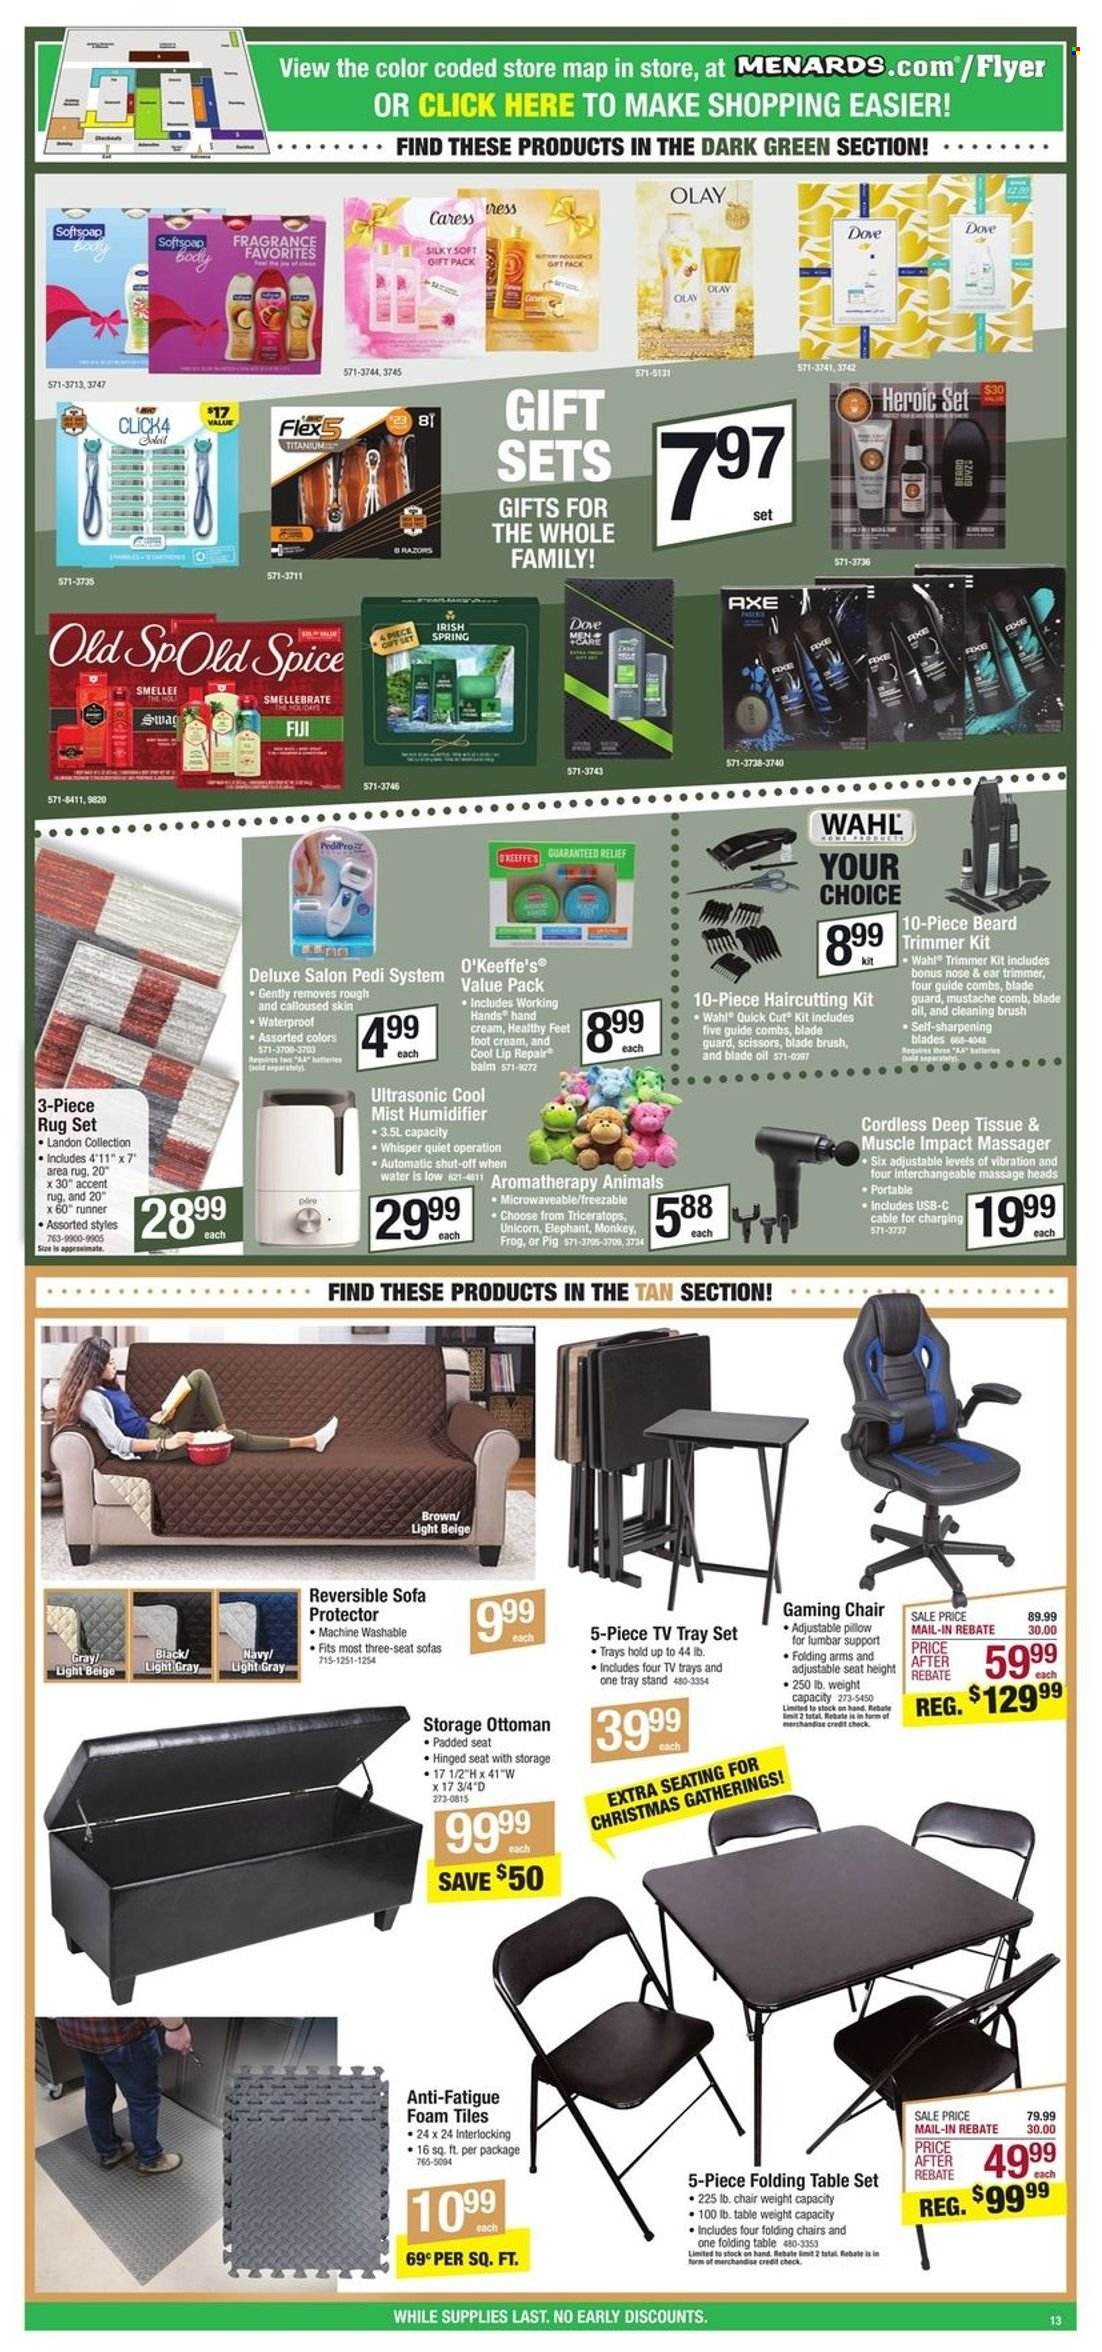 thumbnail - Menards Flyer - 11/24/2022 - 12/04/2022 - Sales products - Dove, spice, oil, tissues, DAC, Whisper, Olay, comb, hand cream, Axe, scissors, pillow, trimmer, haircutting kit, table, table set, chair, sofa, ottoman, folding table, swag, monkey, rug, area rug, anti-fatigue foam. Page 13.